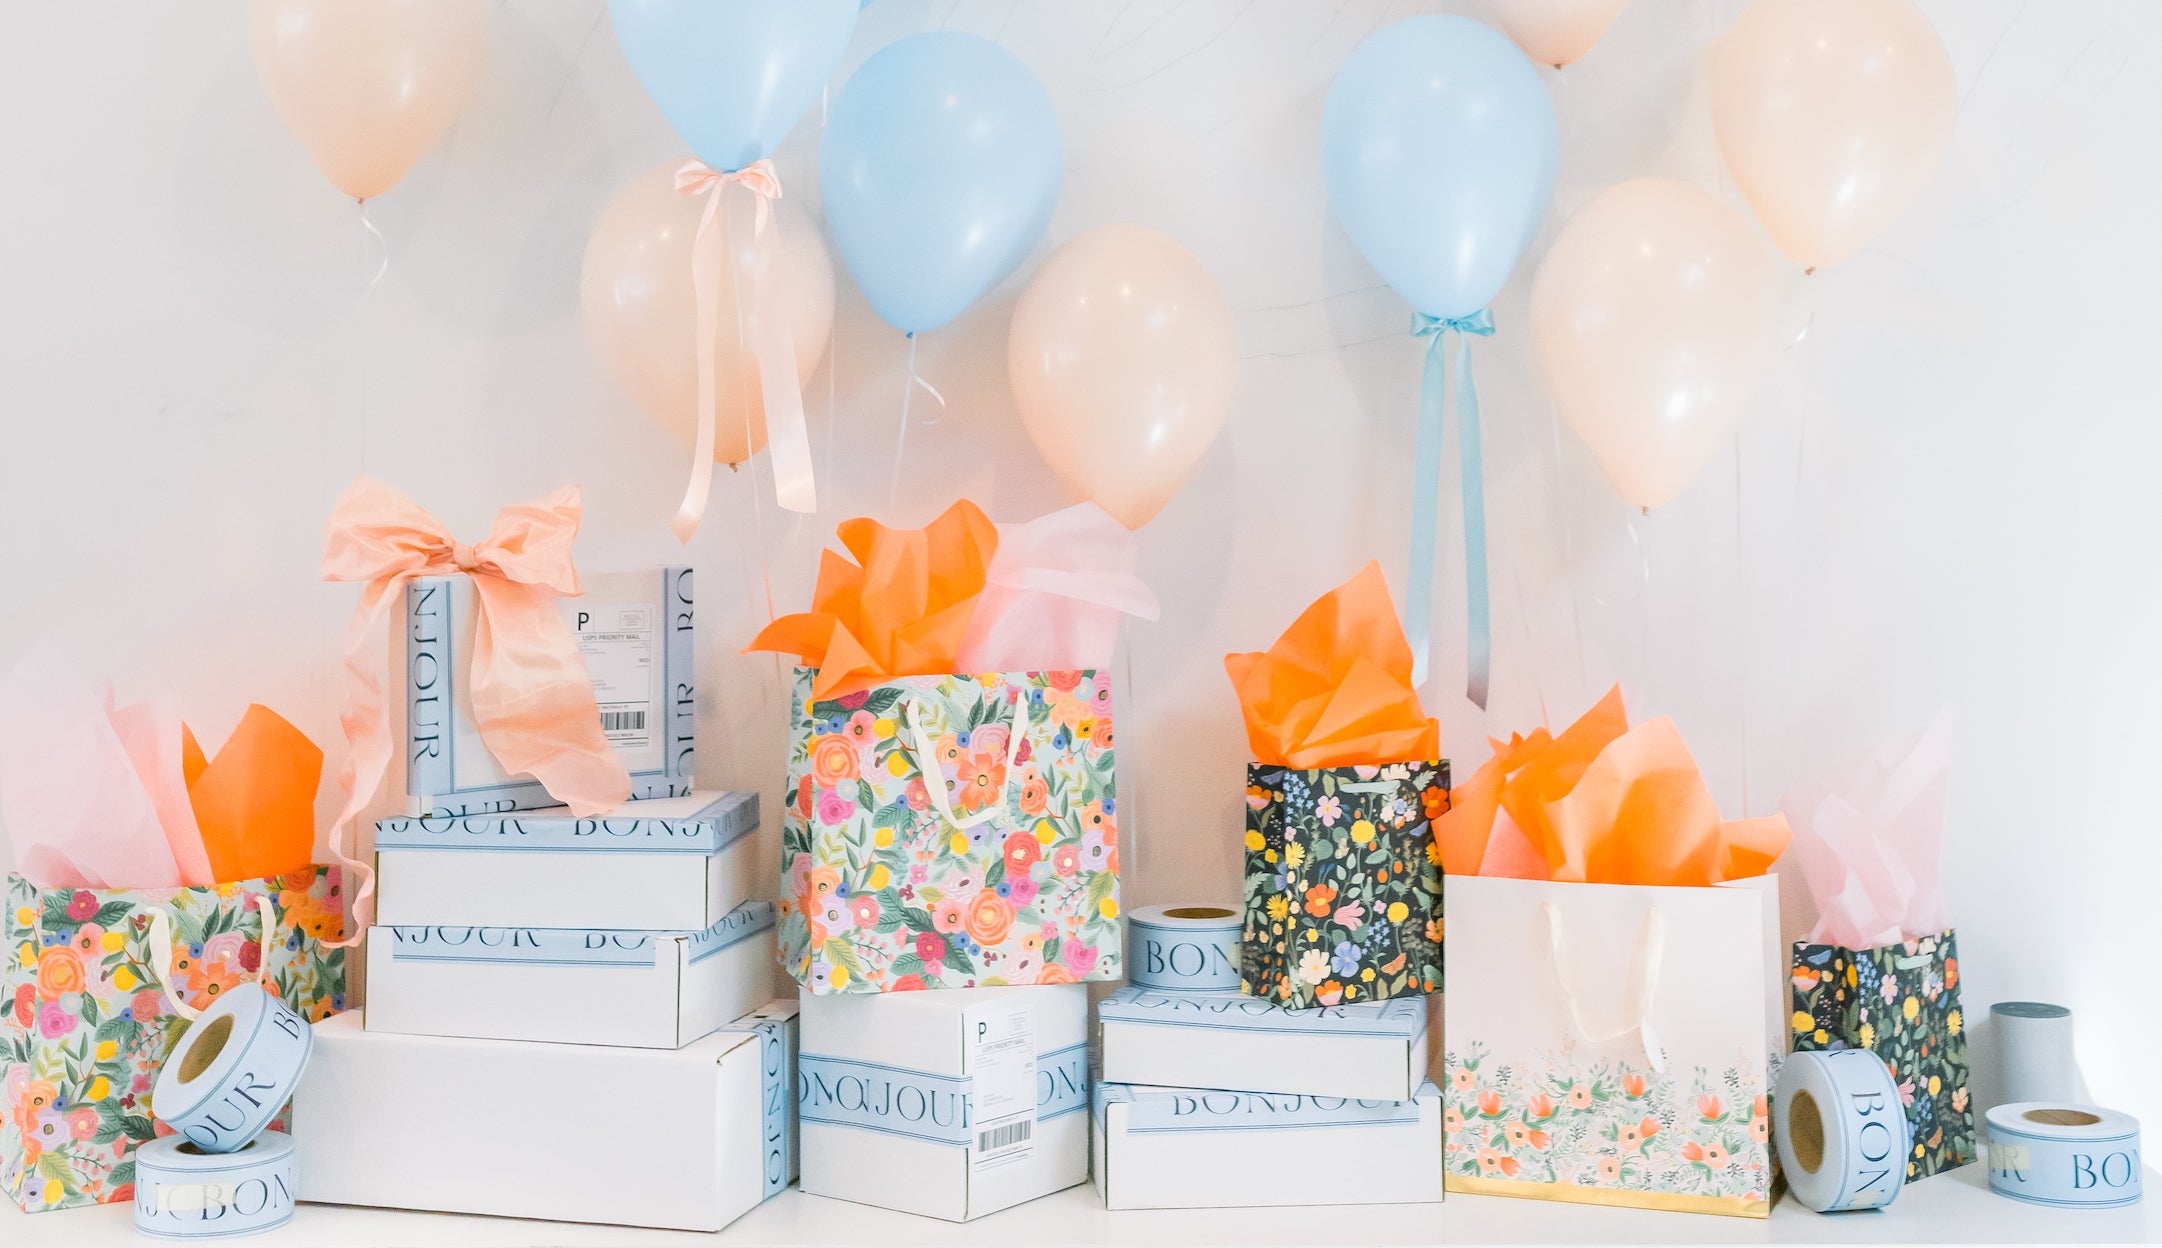 BONJOUR FÊTE: A Party Boutique - Party Supplies, Balloons, & Gifts